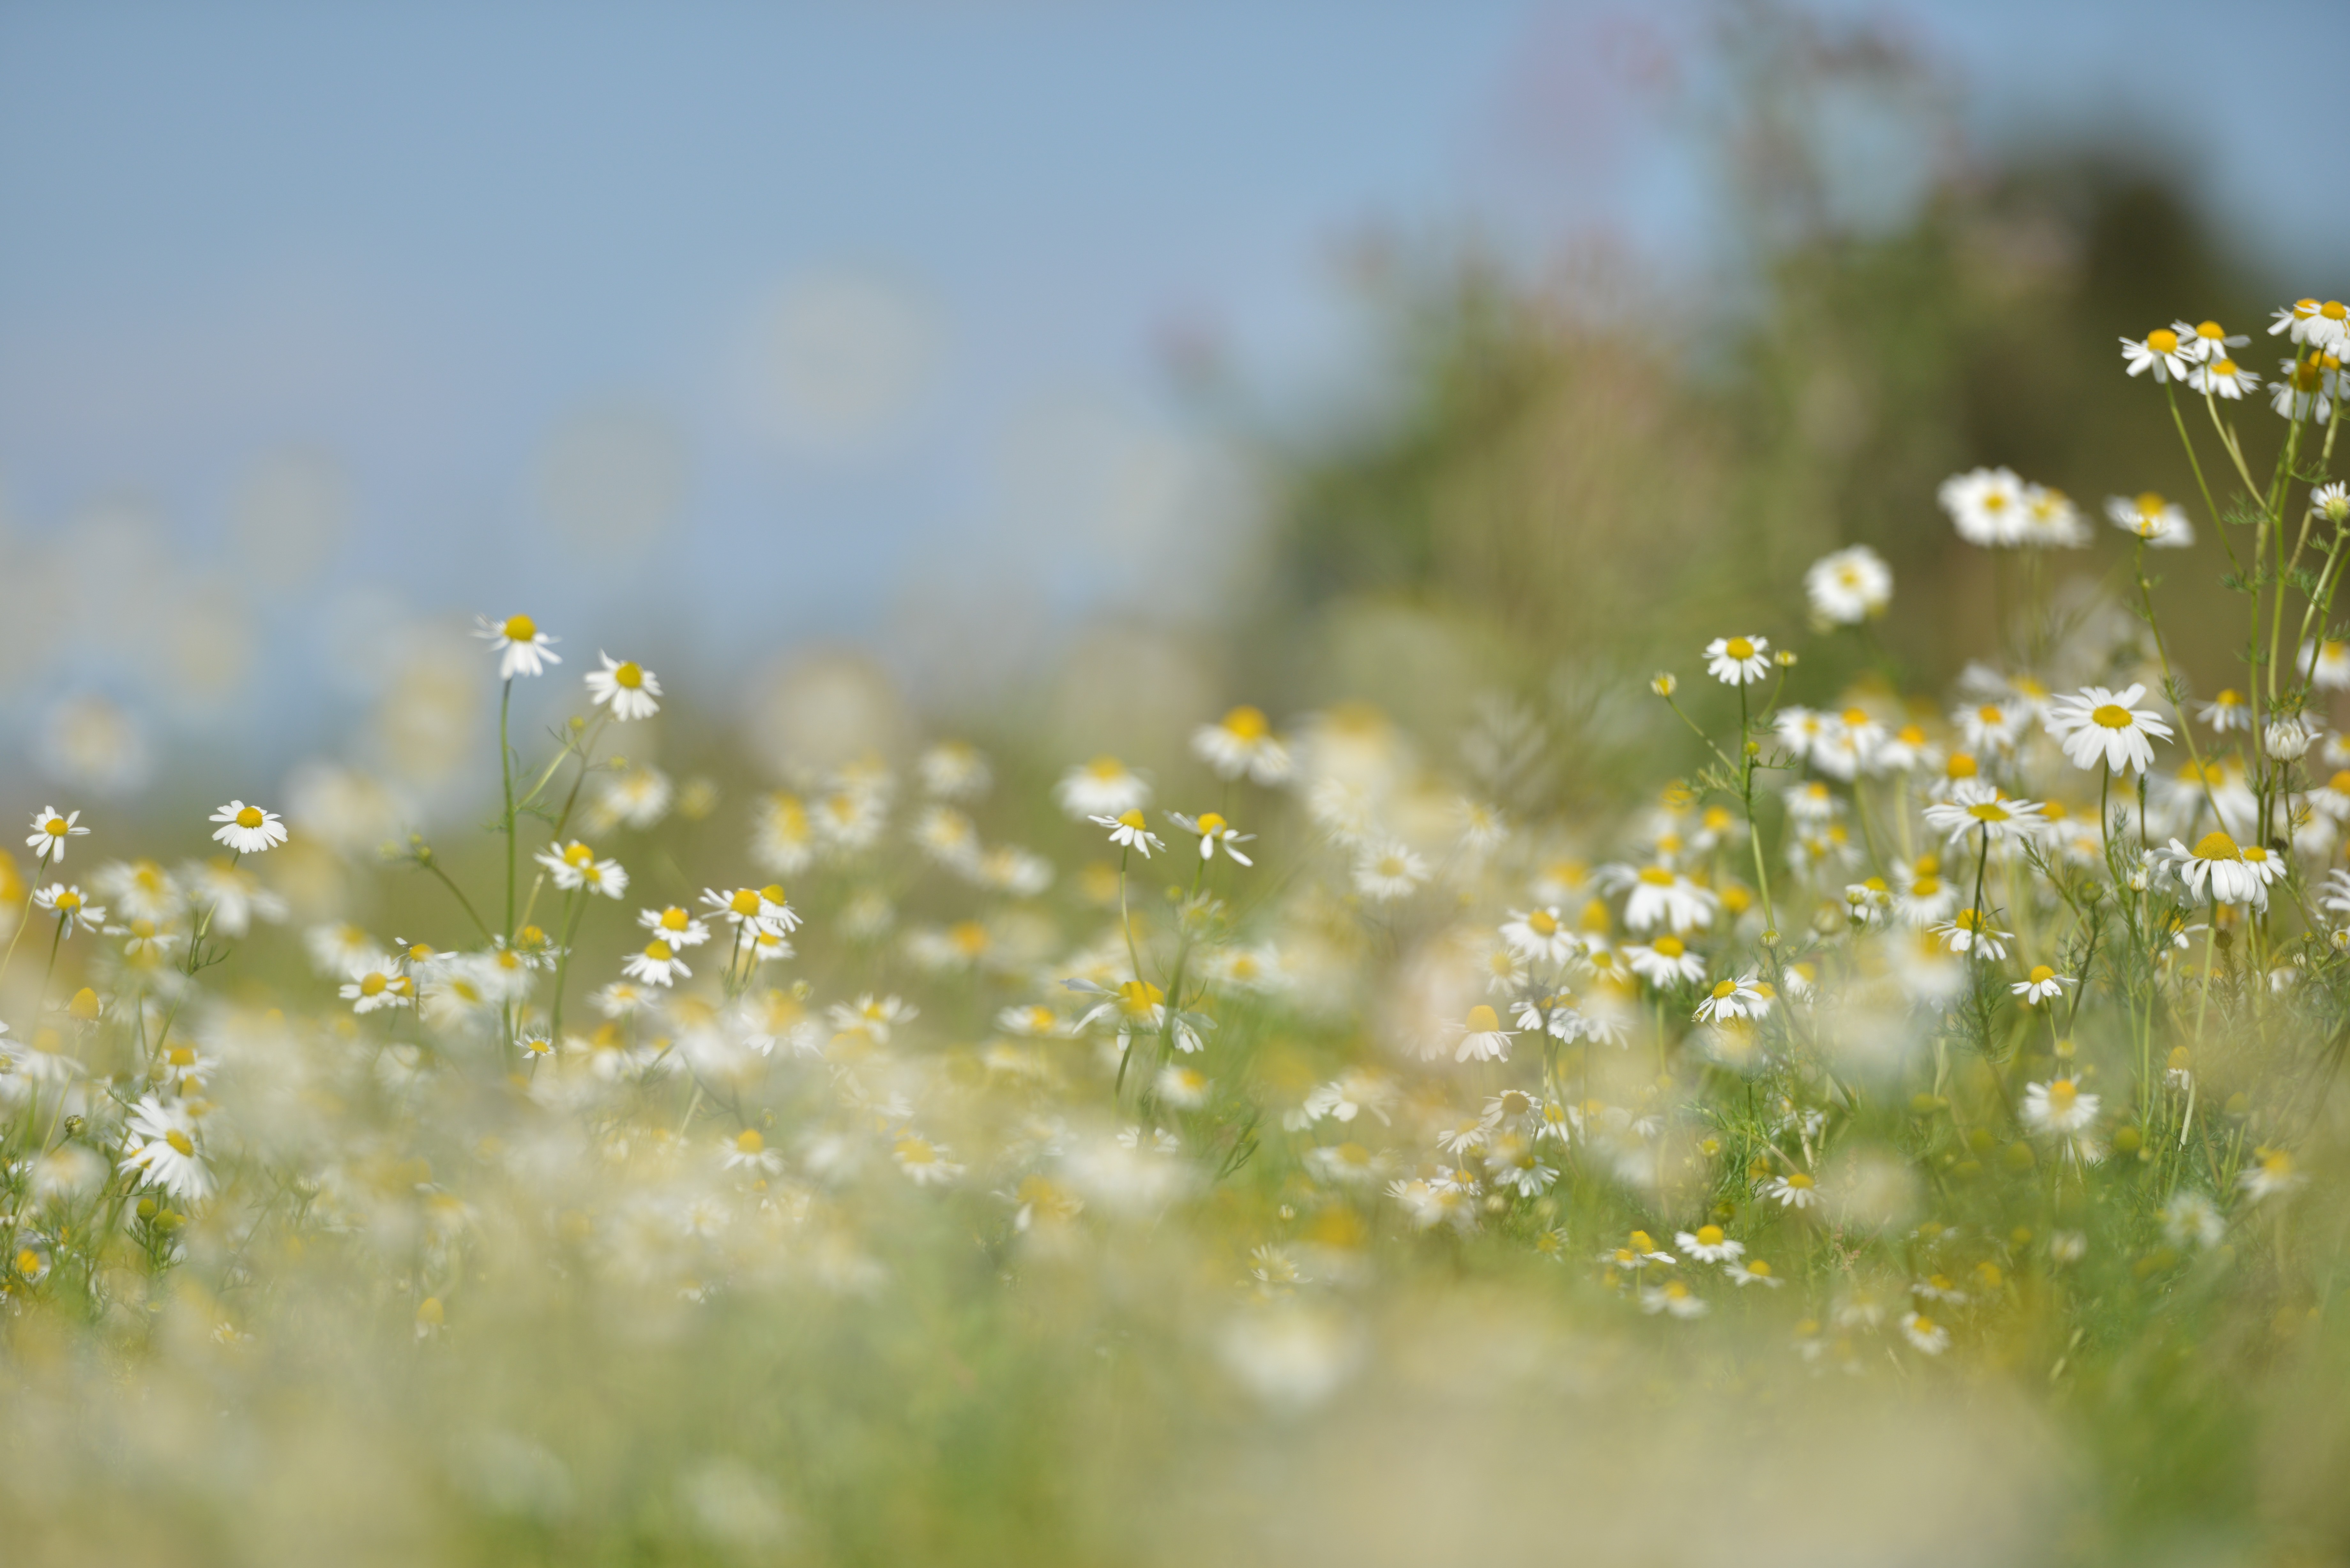 General 7360x4912 nature flowers chamomile plants outdoors